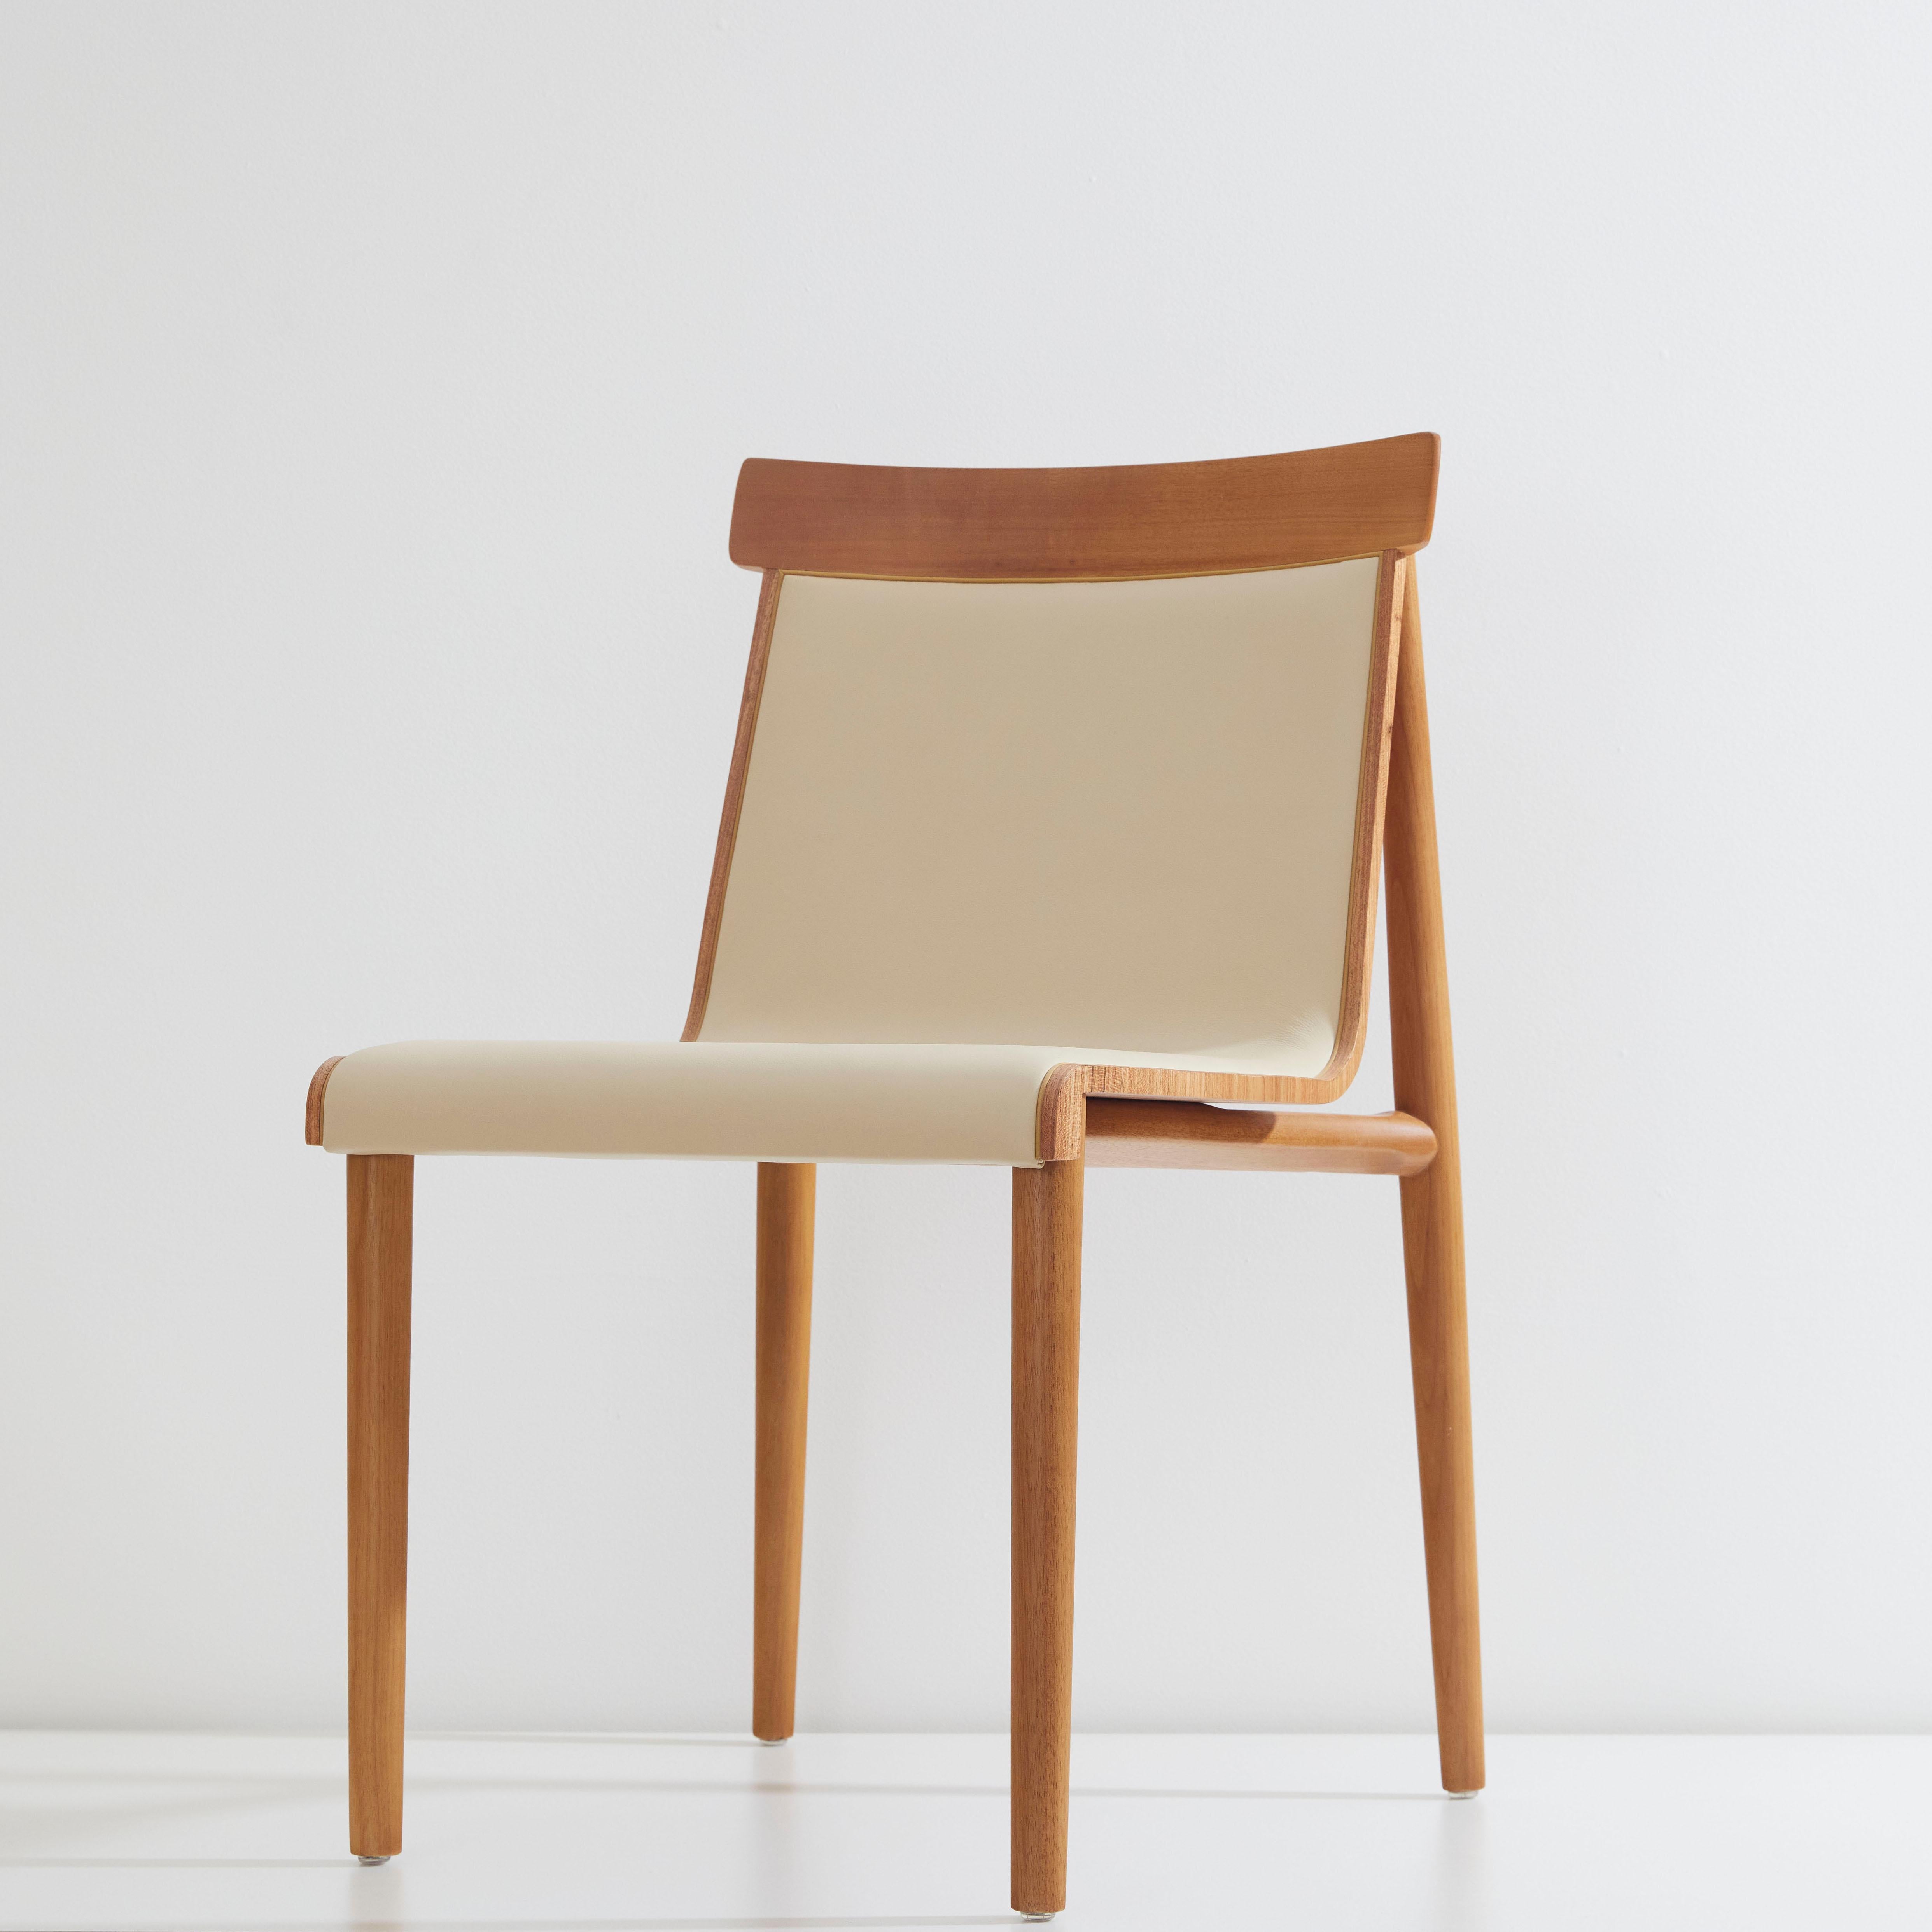 Dry chair collection.

The Dry chair concept is to work in a mixture of distinct references resulting in a modern classic in a dance between the retro and the modern. A heavy and in depth wood work is put to the structure to create interesting